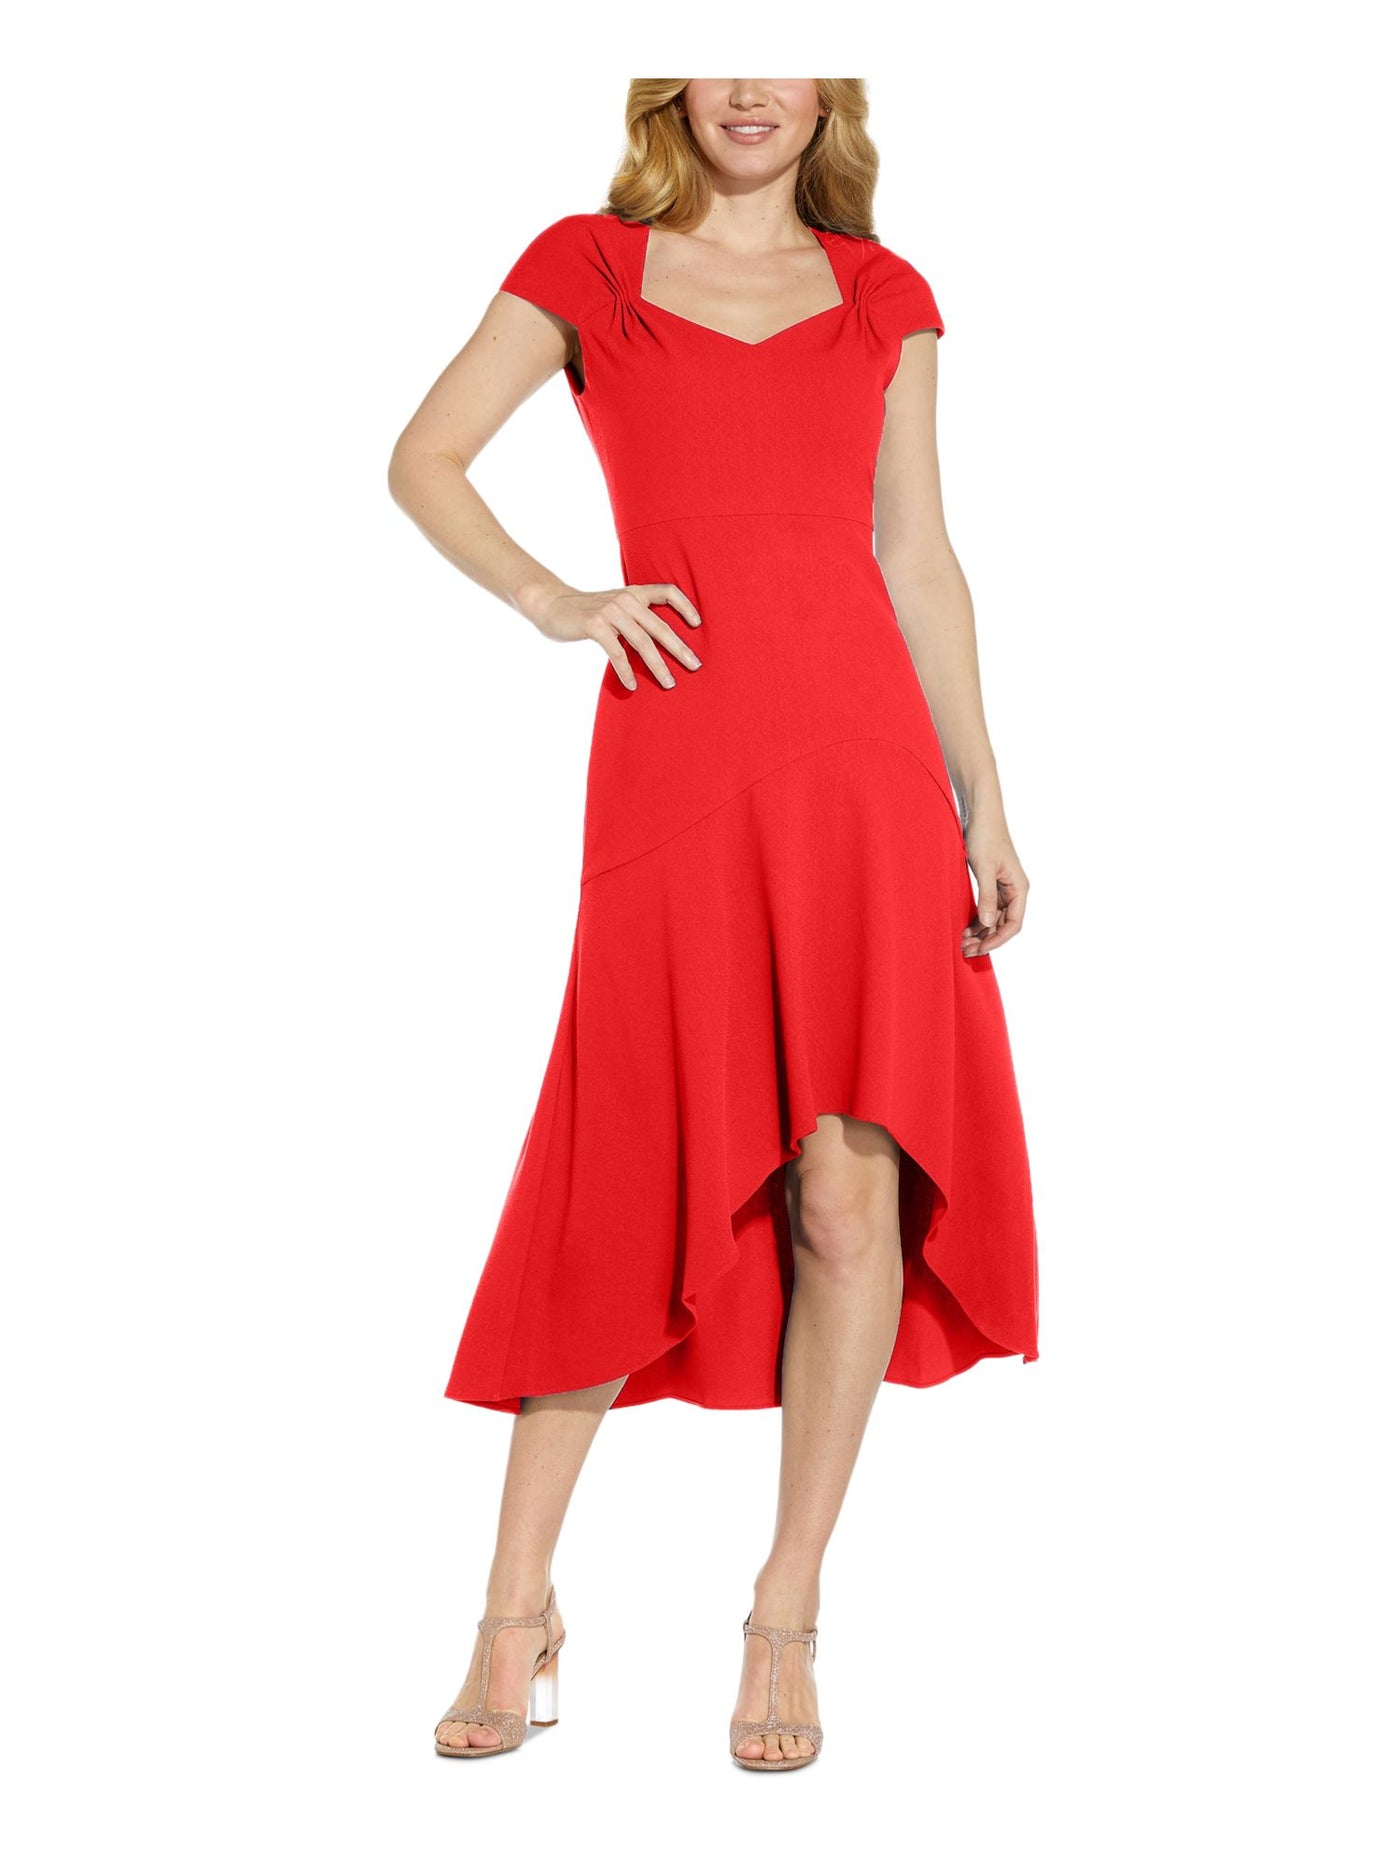 ADRIANNA PAPELL Womens Red Zippered Gathered Cap Sleeve Sweetheart Neckline Midi Party Hi-Lo Dress 2